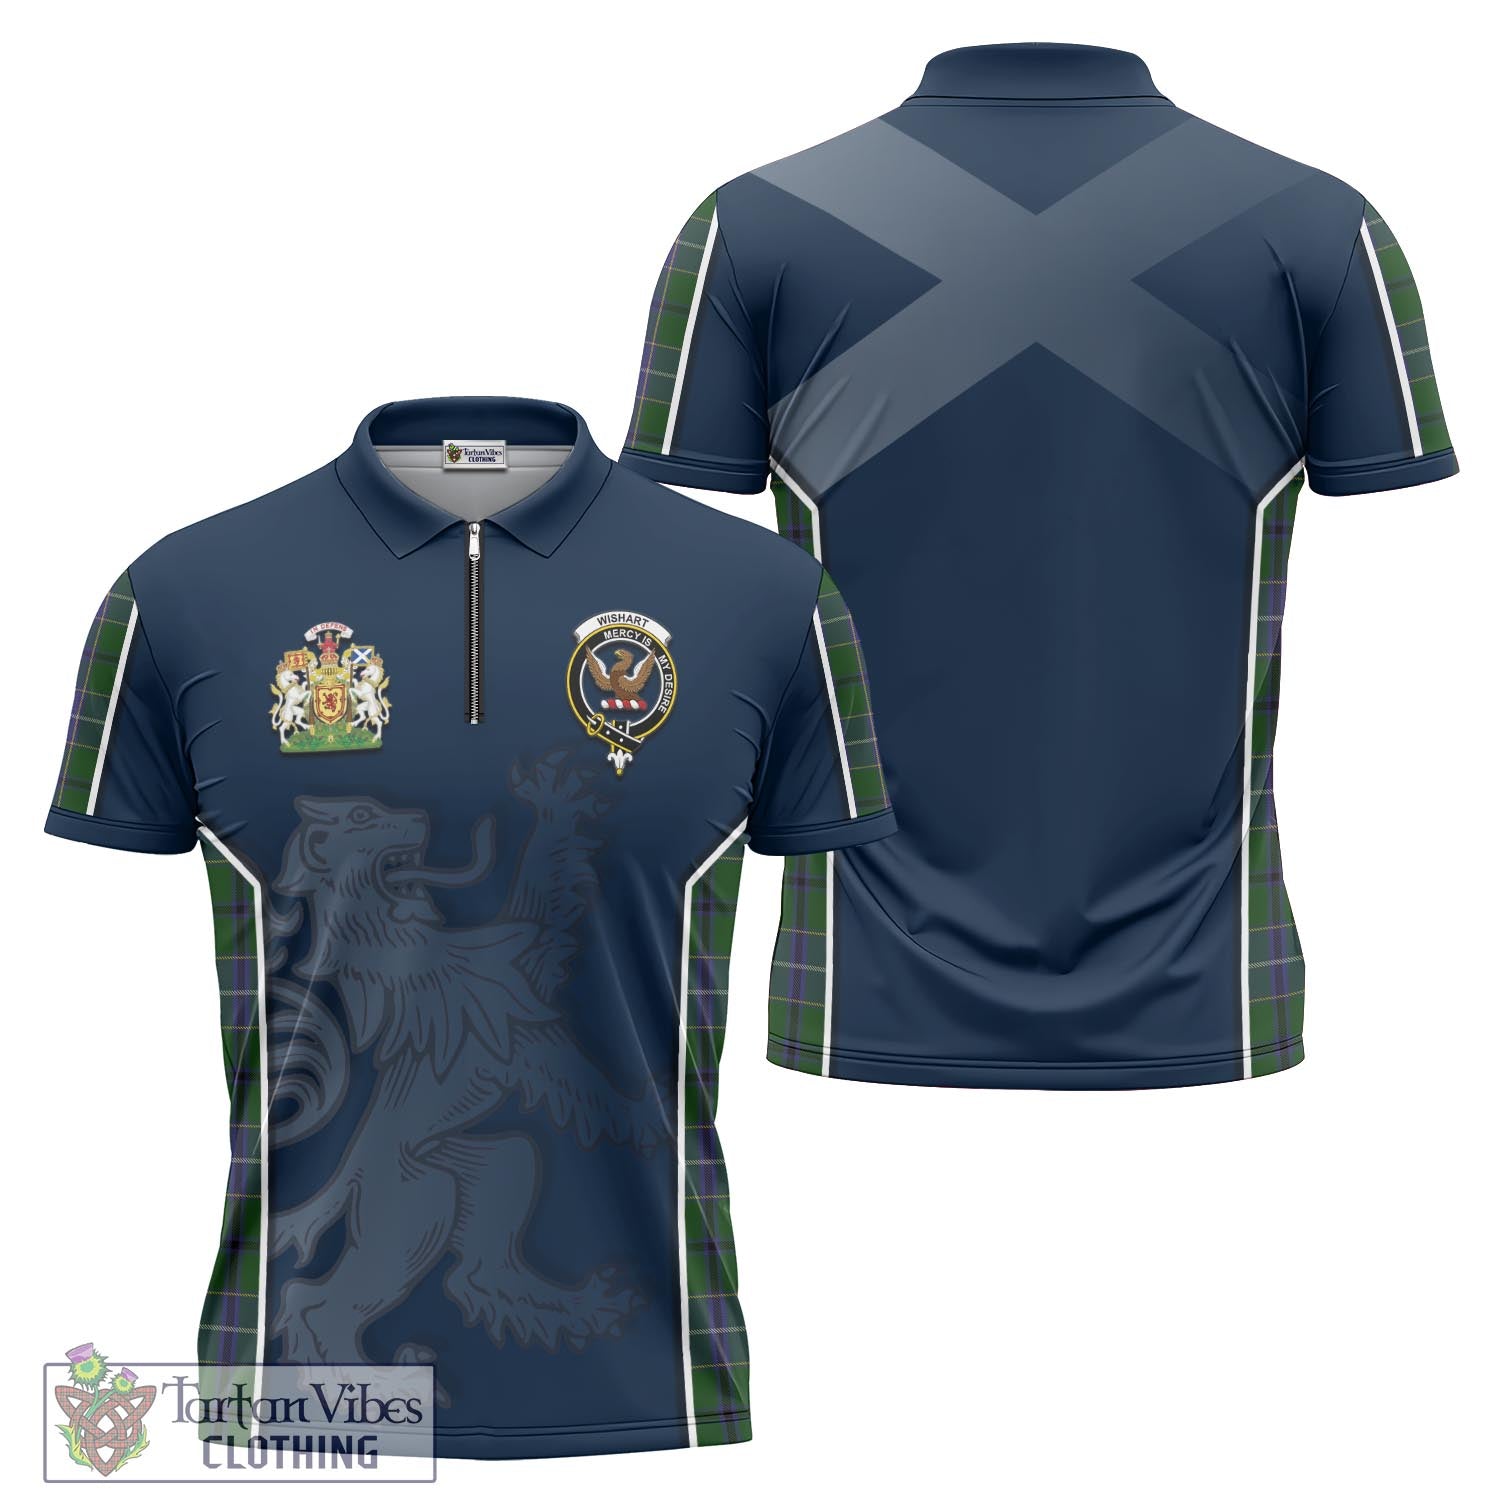 Tartan Vibes Clothing Wishart Hunting Tartan Zipper Polo Shirt with Family Crest and Lion Rampant Vibes Sport Style